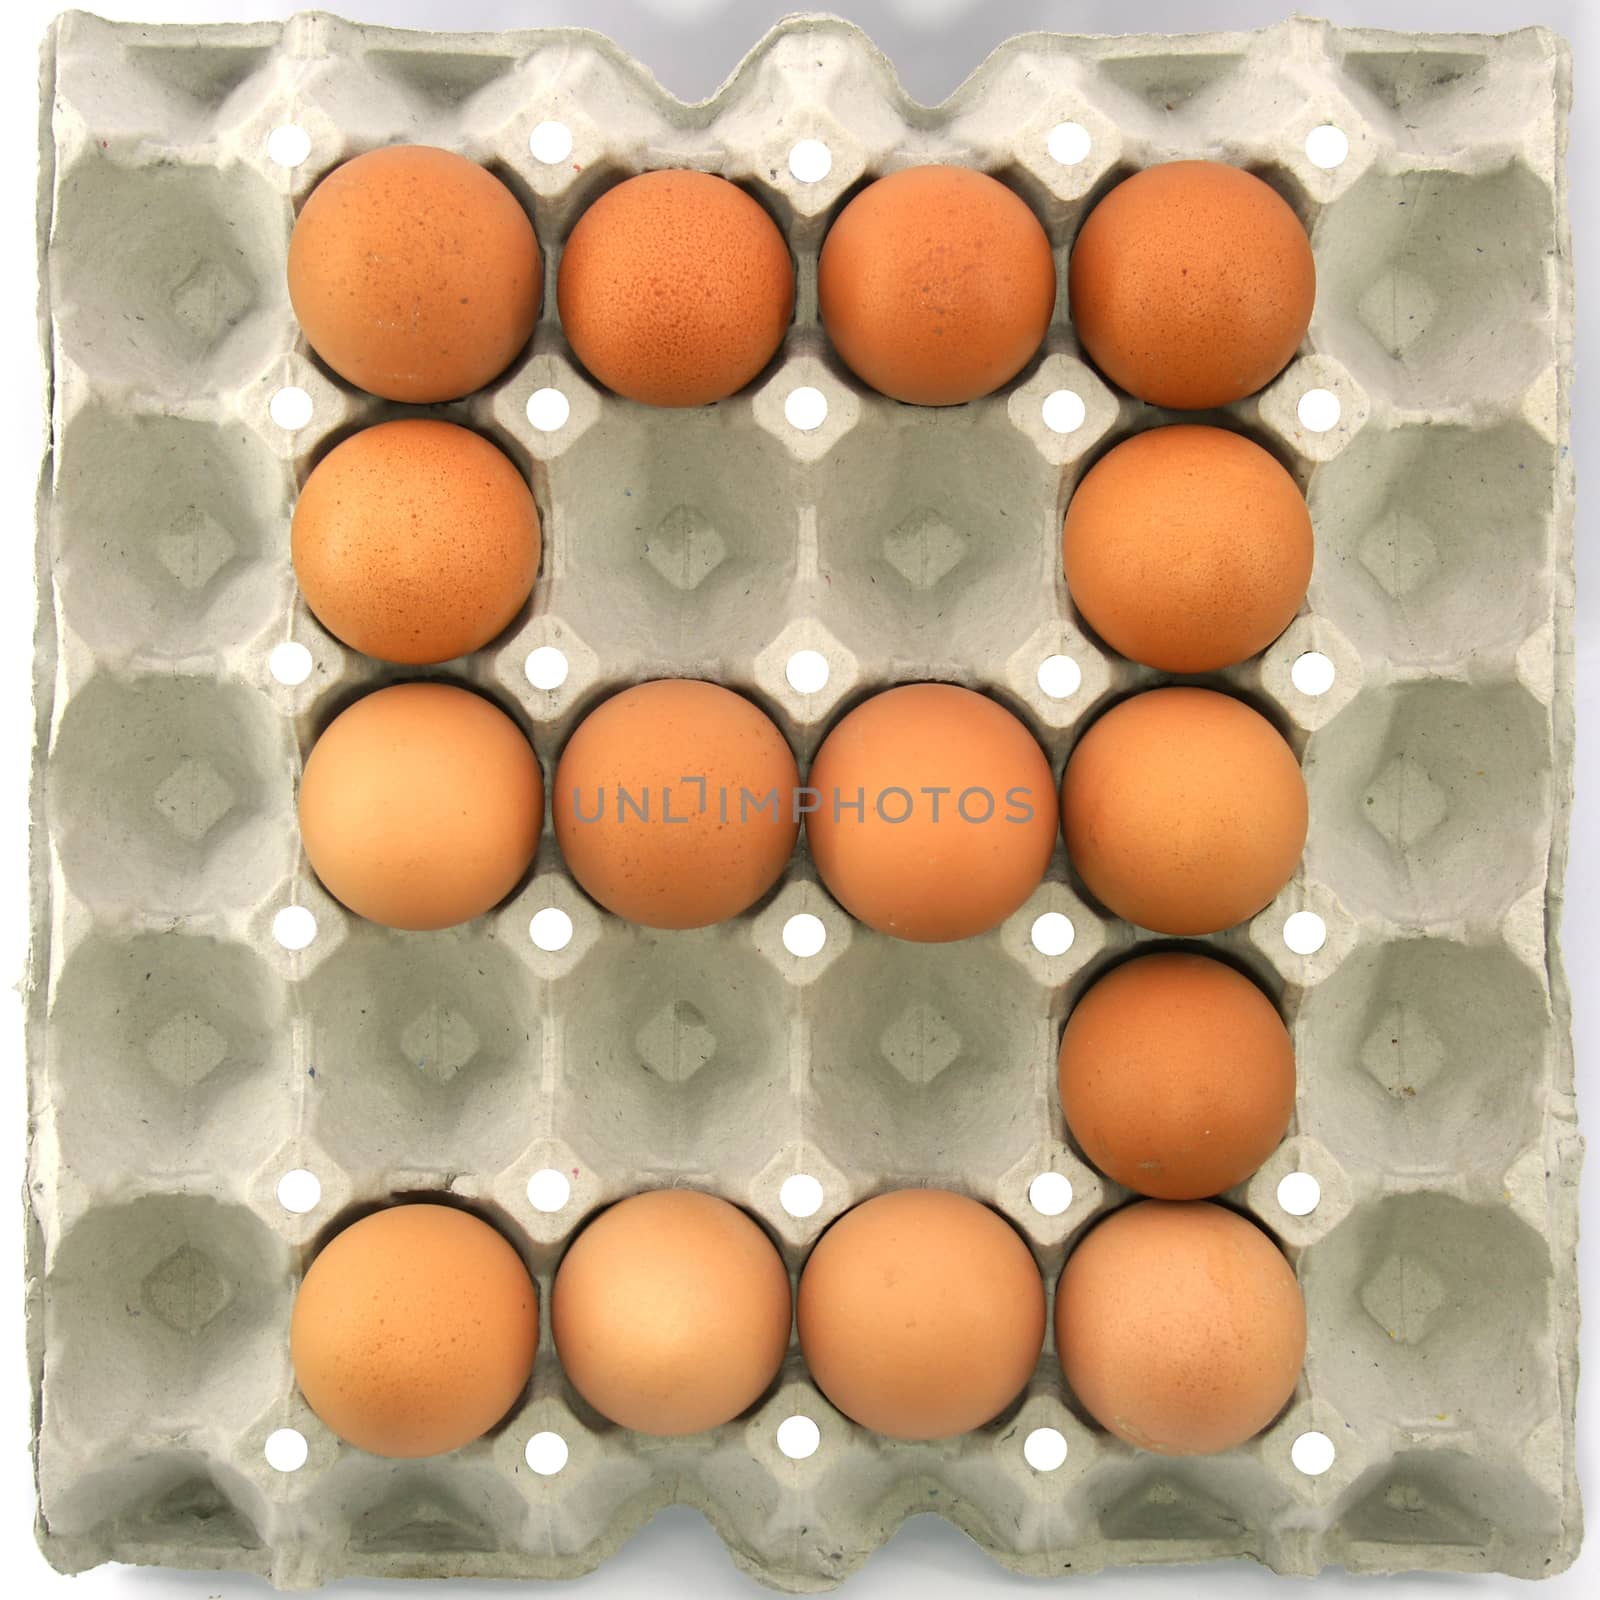 Number nine of eggs in the paper package tray